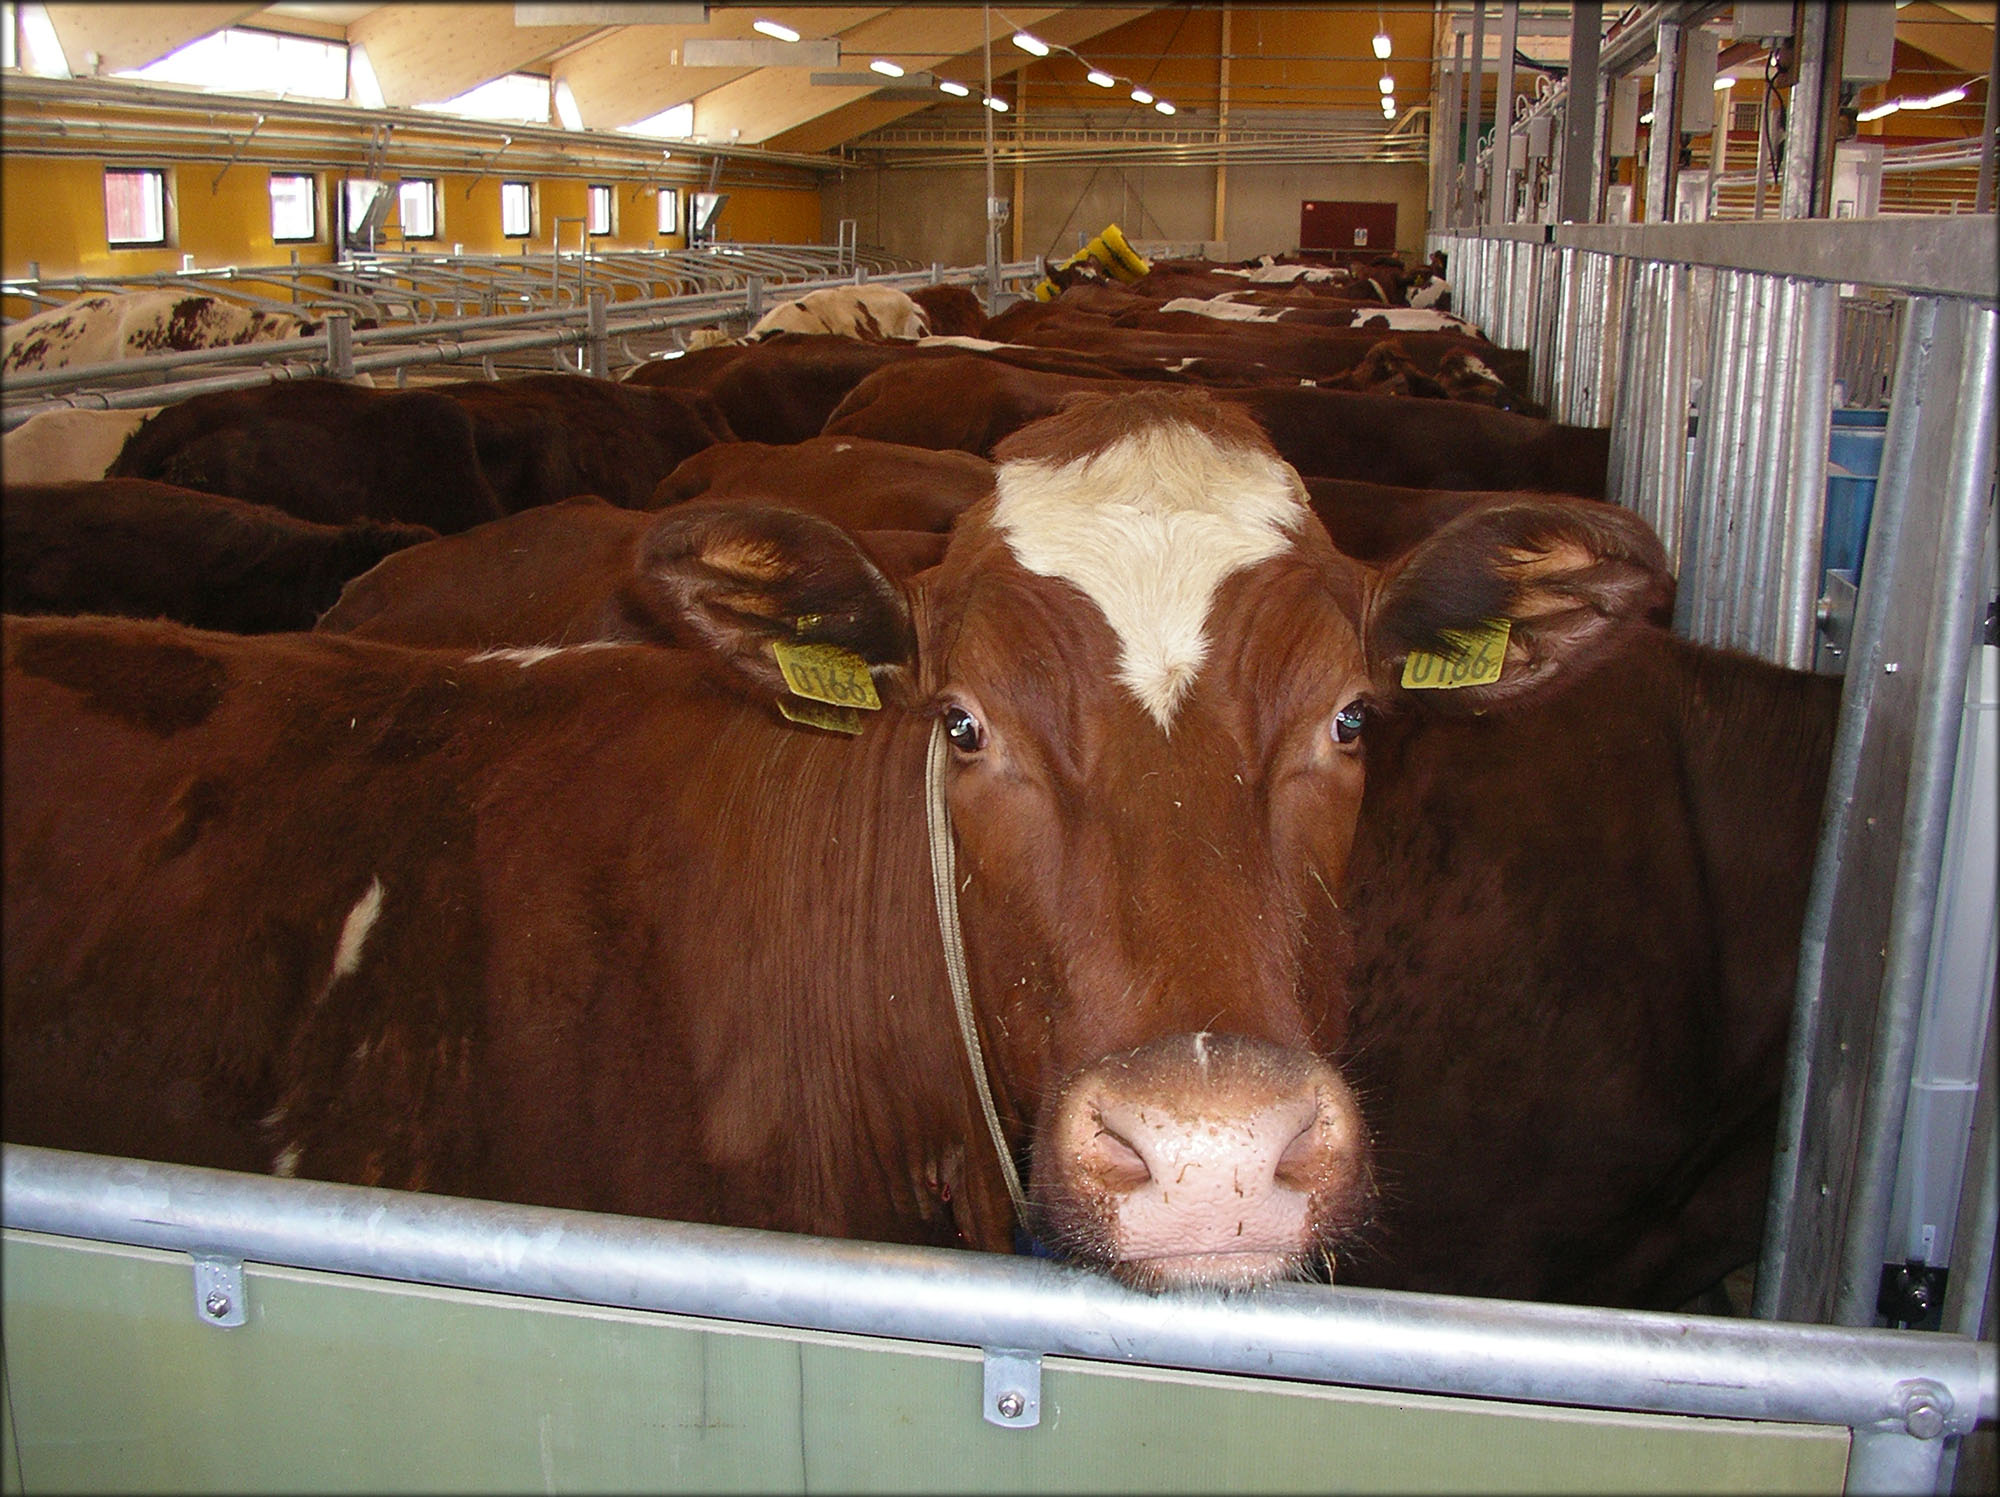 A red and white cow who looks into the camera. Photo.